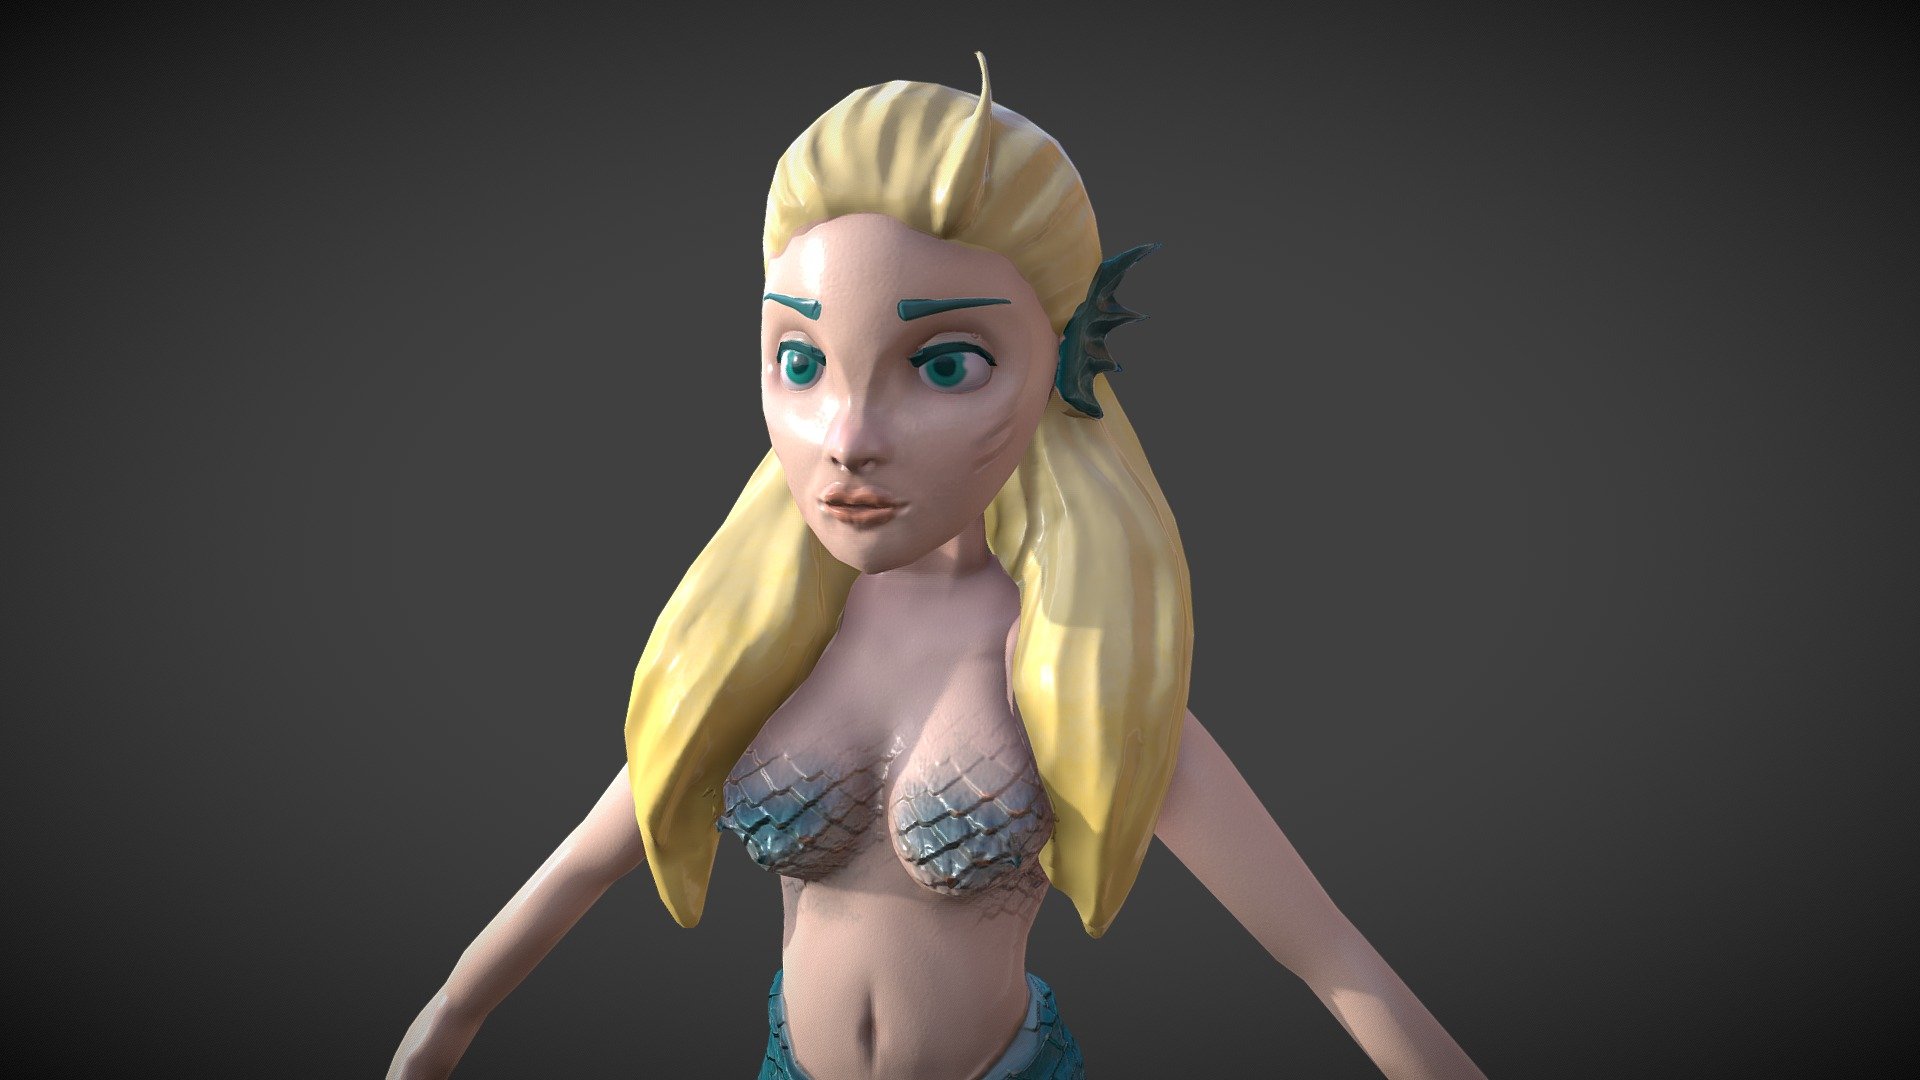 Mermaid character i made for game project Gamorets - Mermaid Character - 3D model by minerva_99 3d model